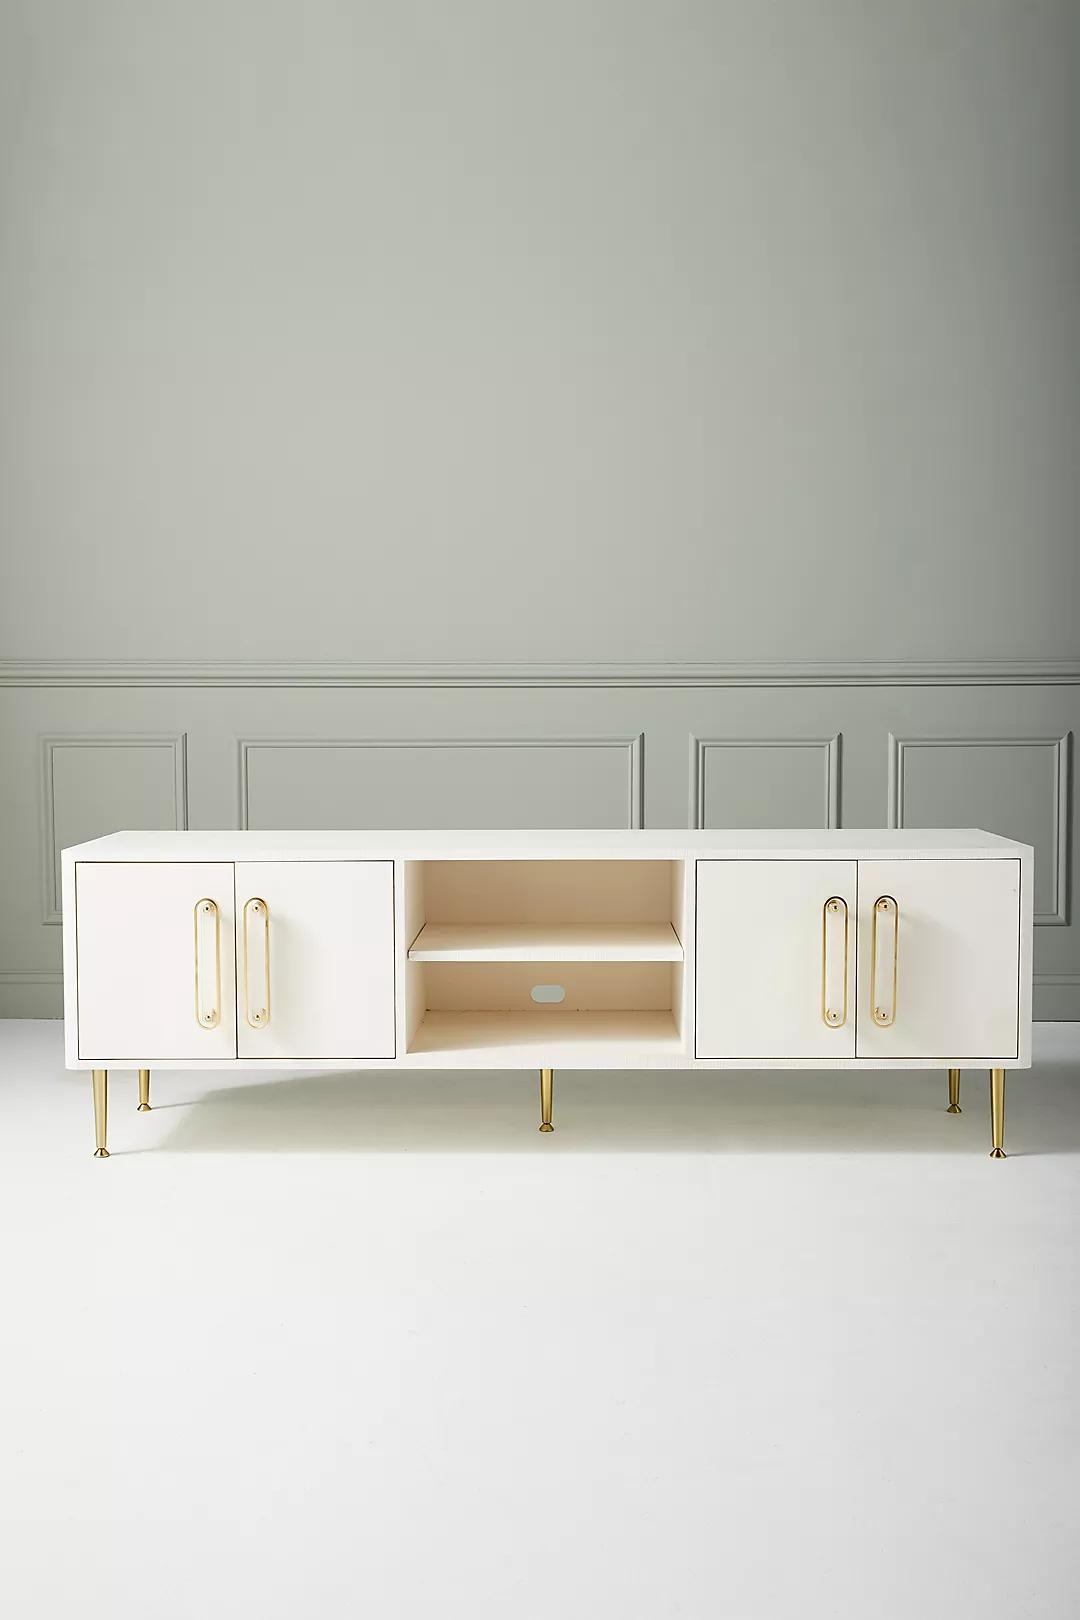 Odetta Media Console By Tracey Boyd in Beige - Image 0